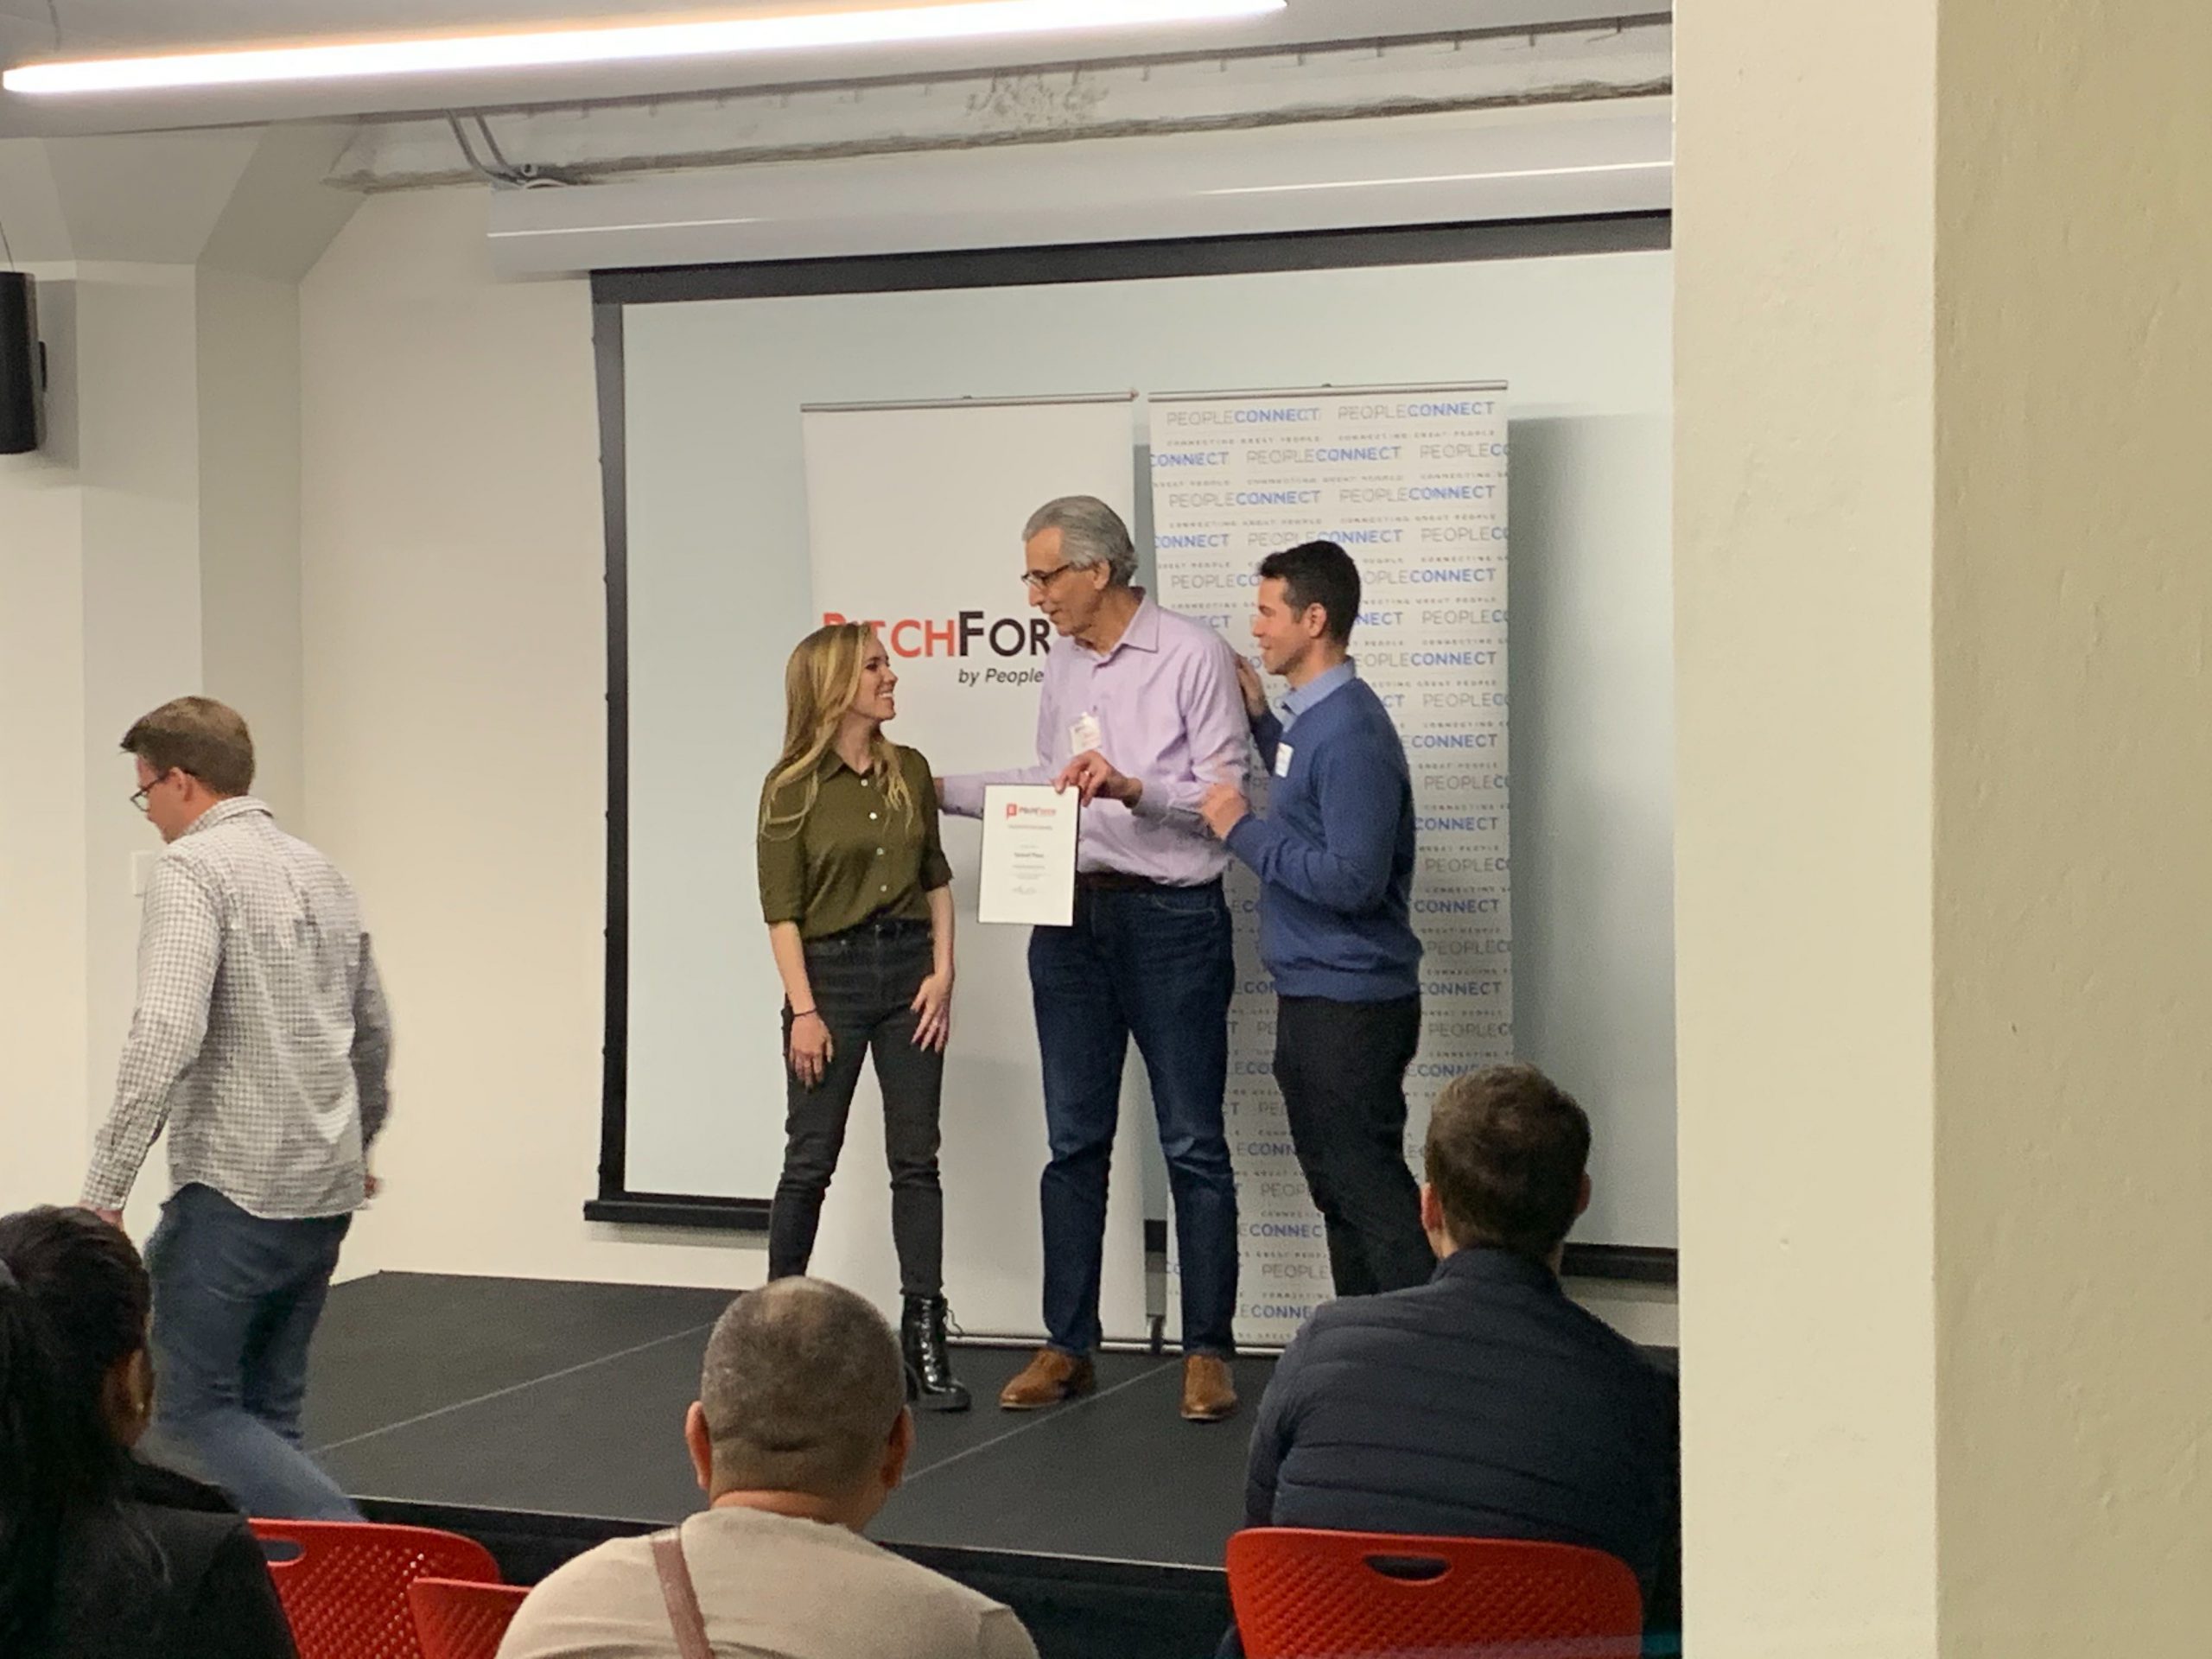 Perimeter wins at second pitch competition in two weeks